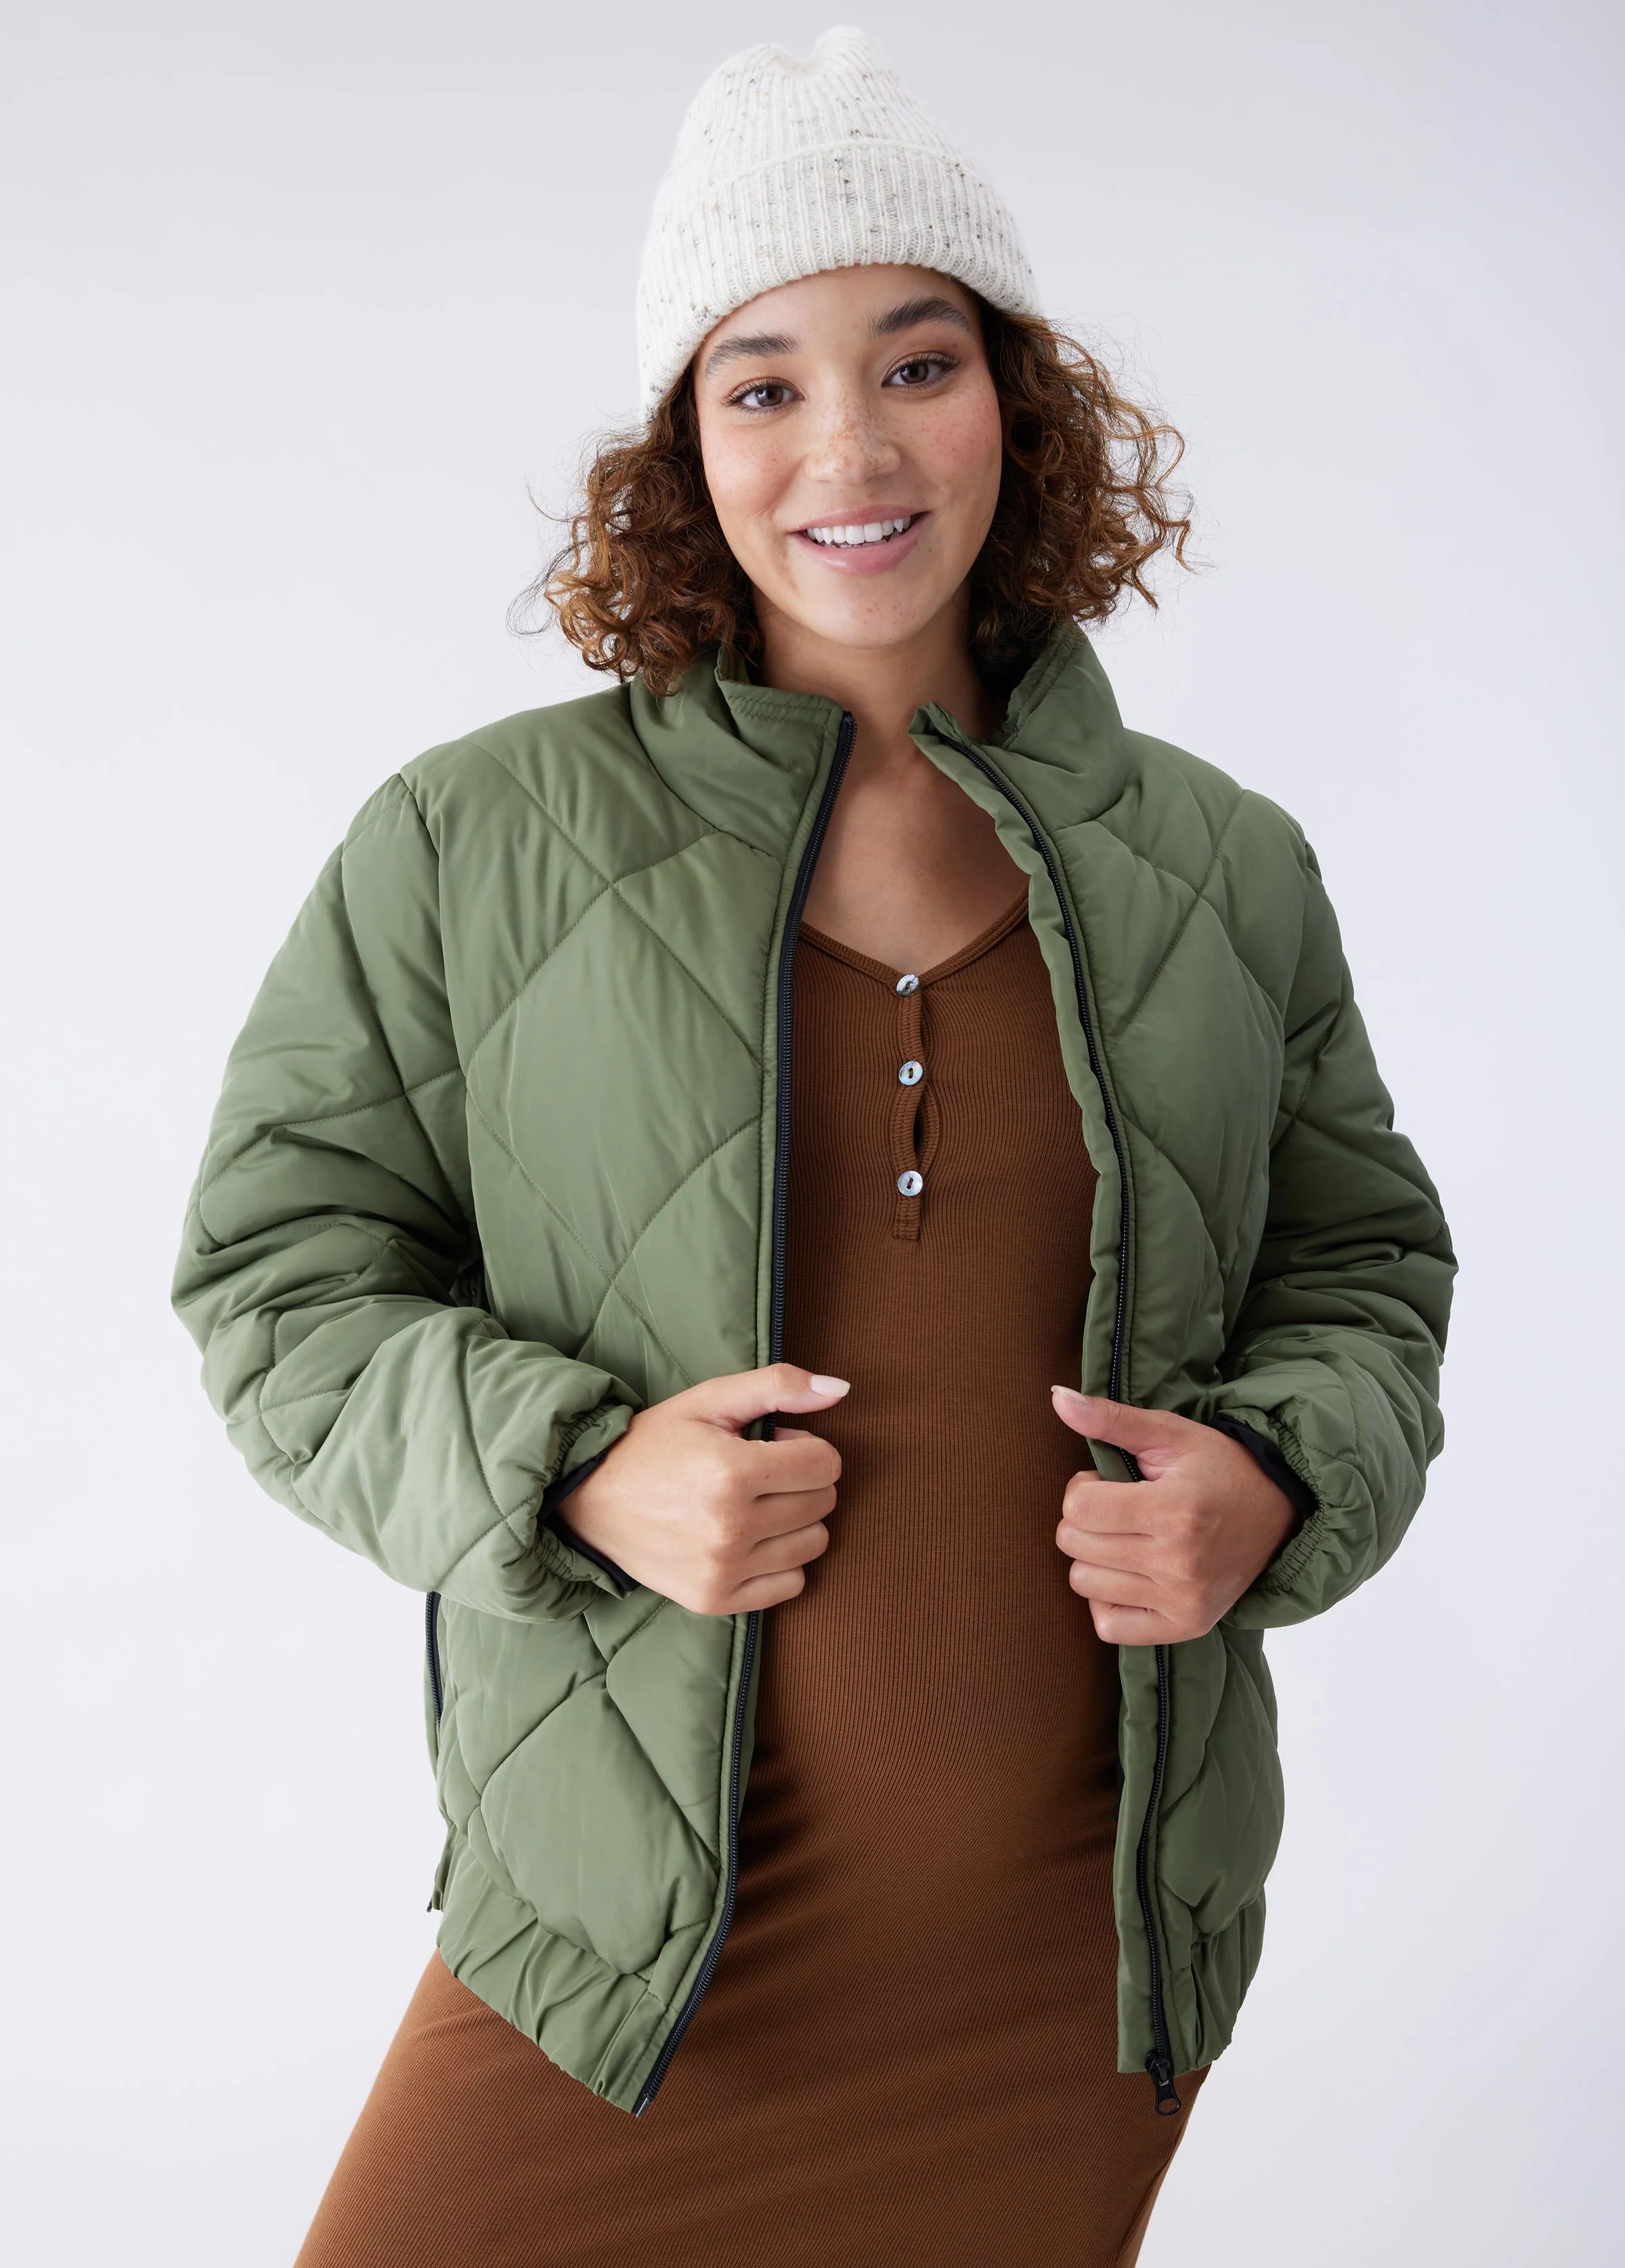 Grow With You Puffer Jacket | Ingrid & Isabel